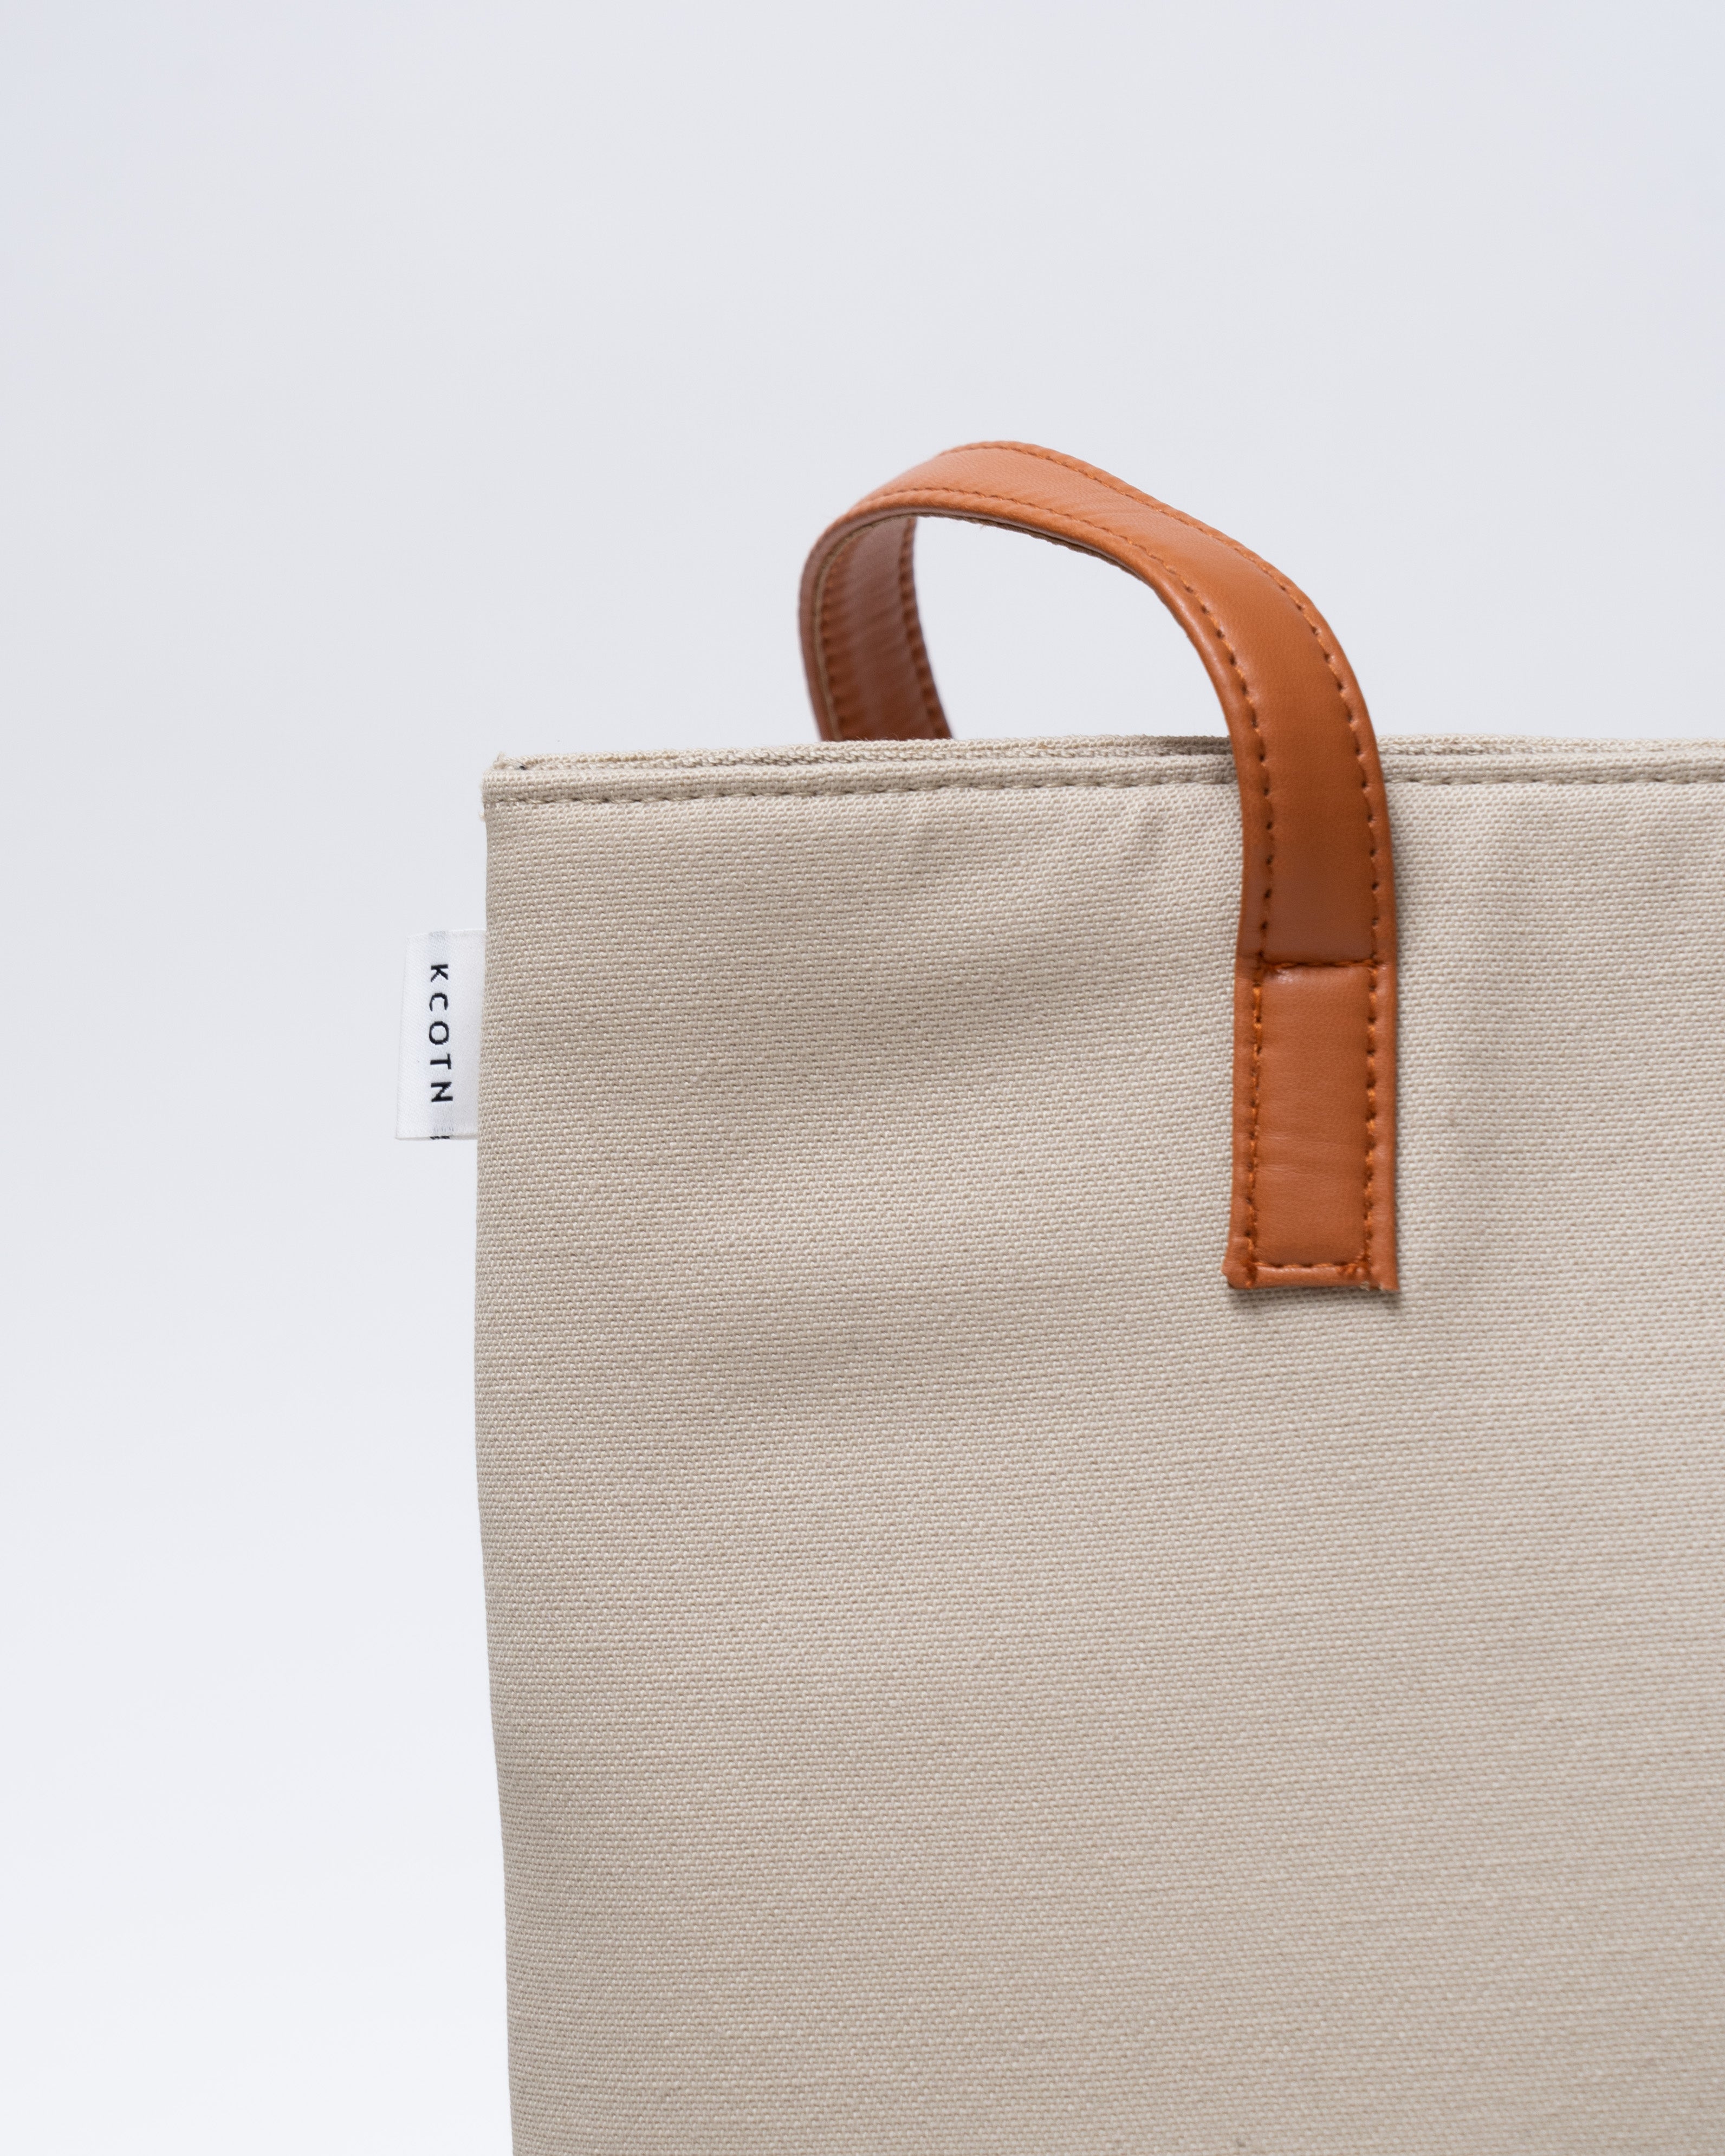 Blissful Tote Bag